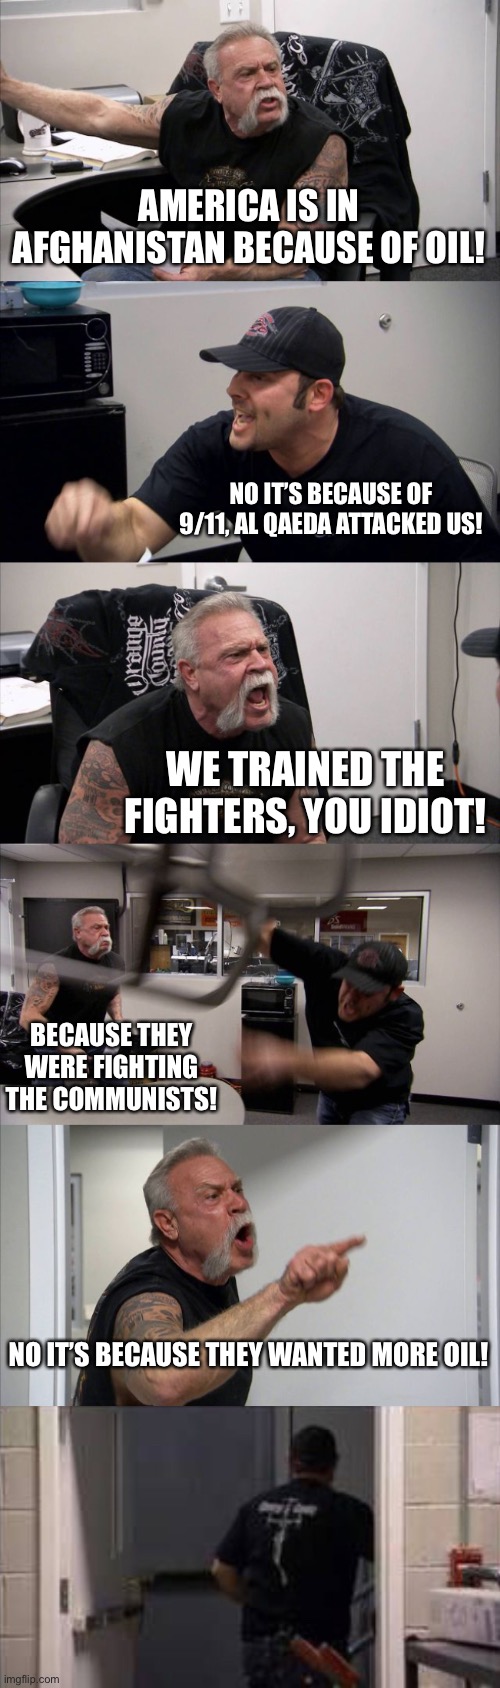 AMERICA IS IN AFGHANISTAN BECAUSE OF OIL! NO IT’S BECAUSE OF 9/11, AL QAEDA ATTACKED US! WE TRAINED THE FIGHTERS, YOU IDIOT! BECAUSE THEY WERE FIGHTING THE COMMUNISTS! NO IT’S BECAUSE THEY WANTED MORE OIL! | image tagged in memes,american chopper argument,stupid liberals | made w/ Imgflip meme maker